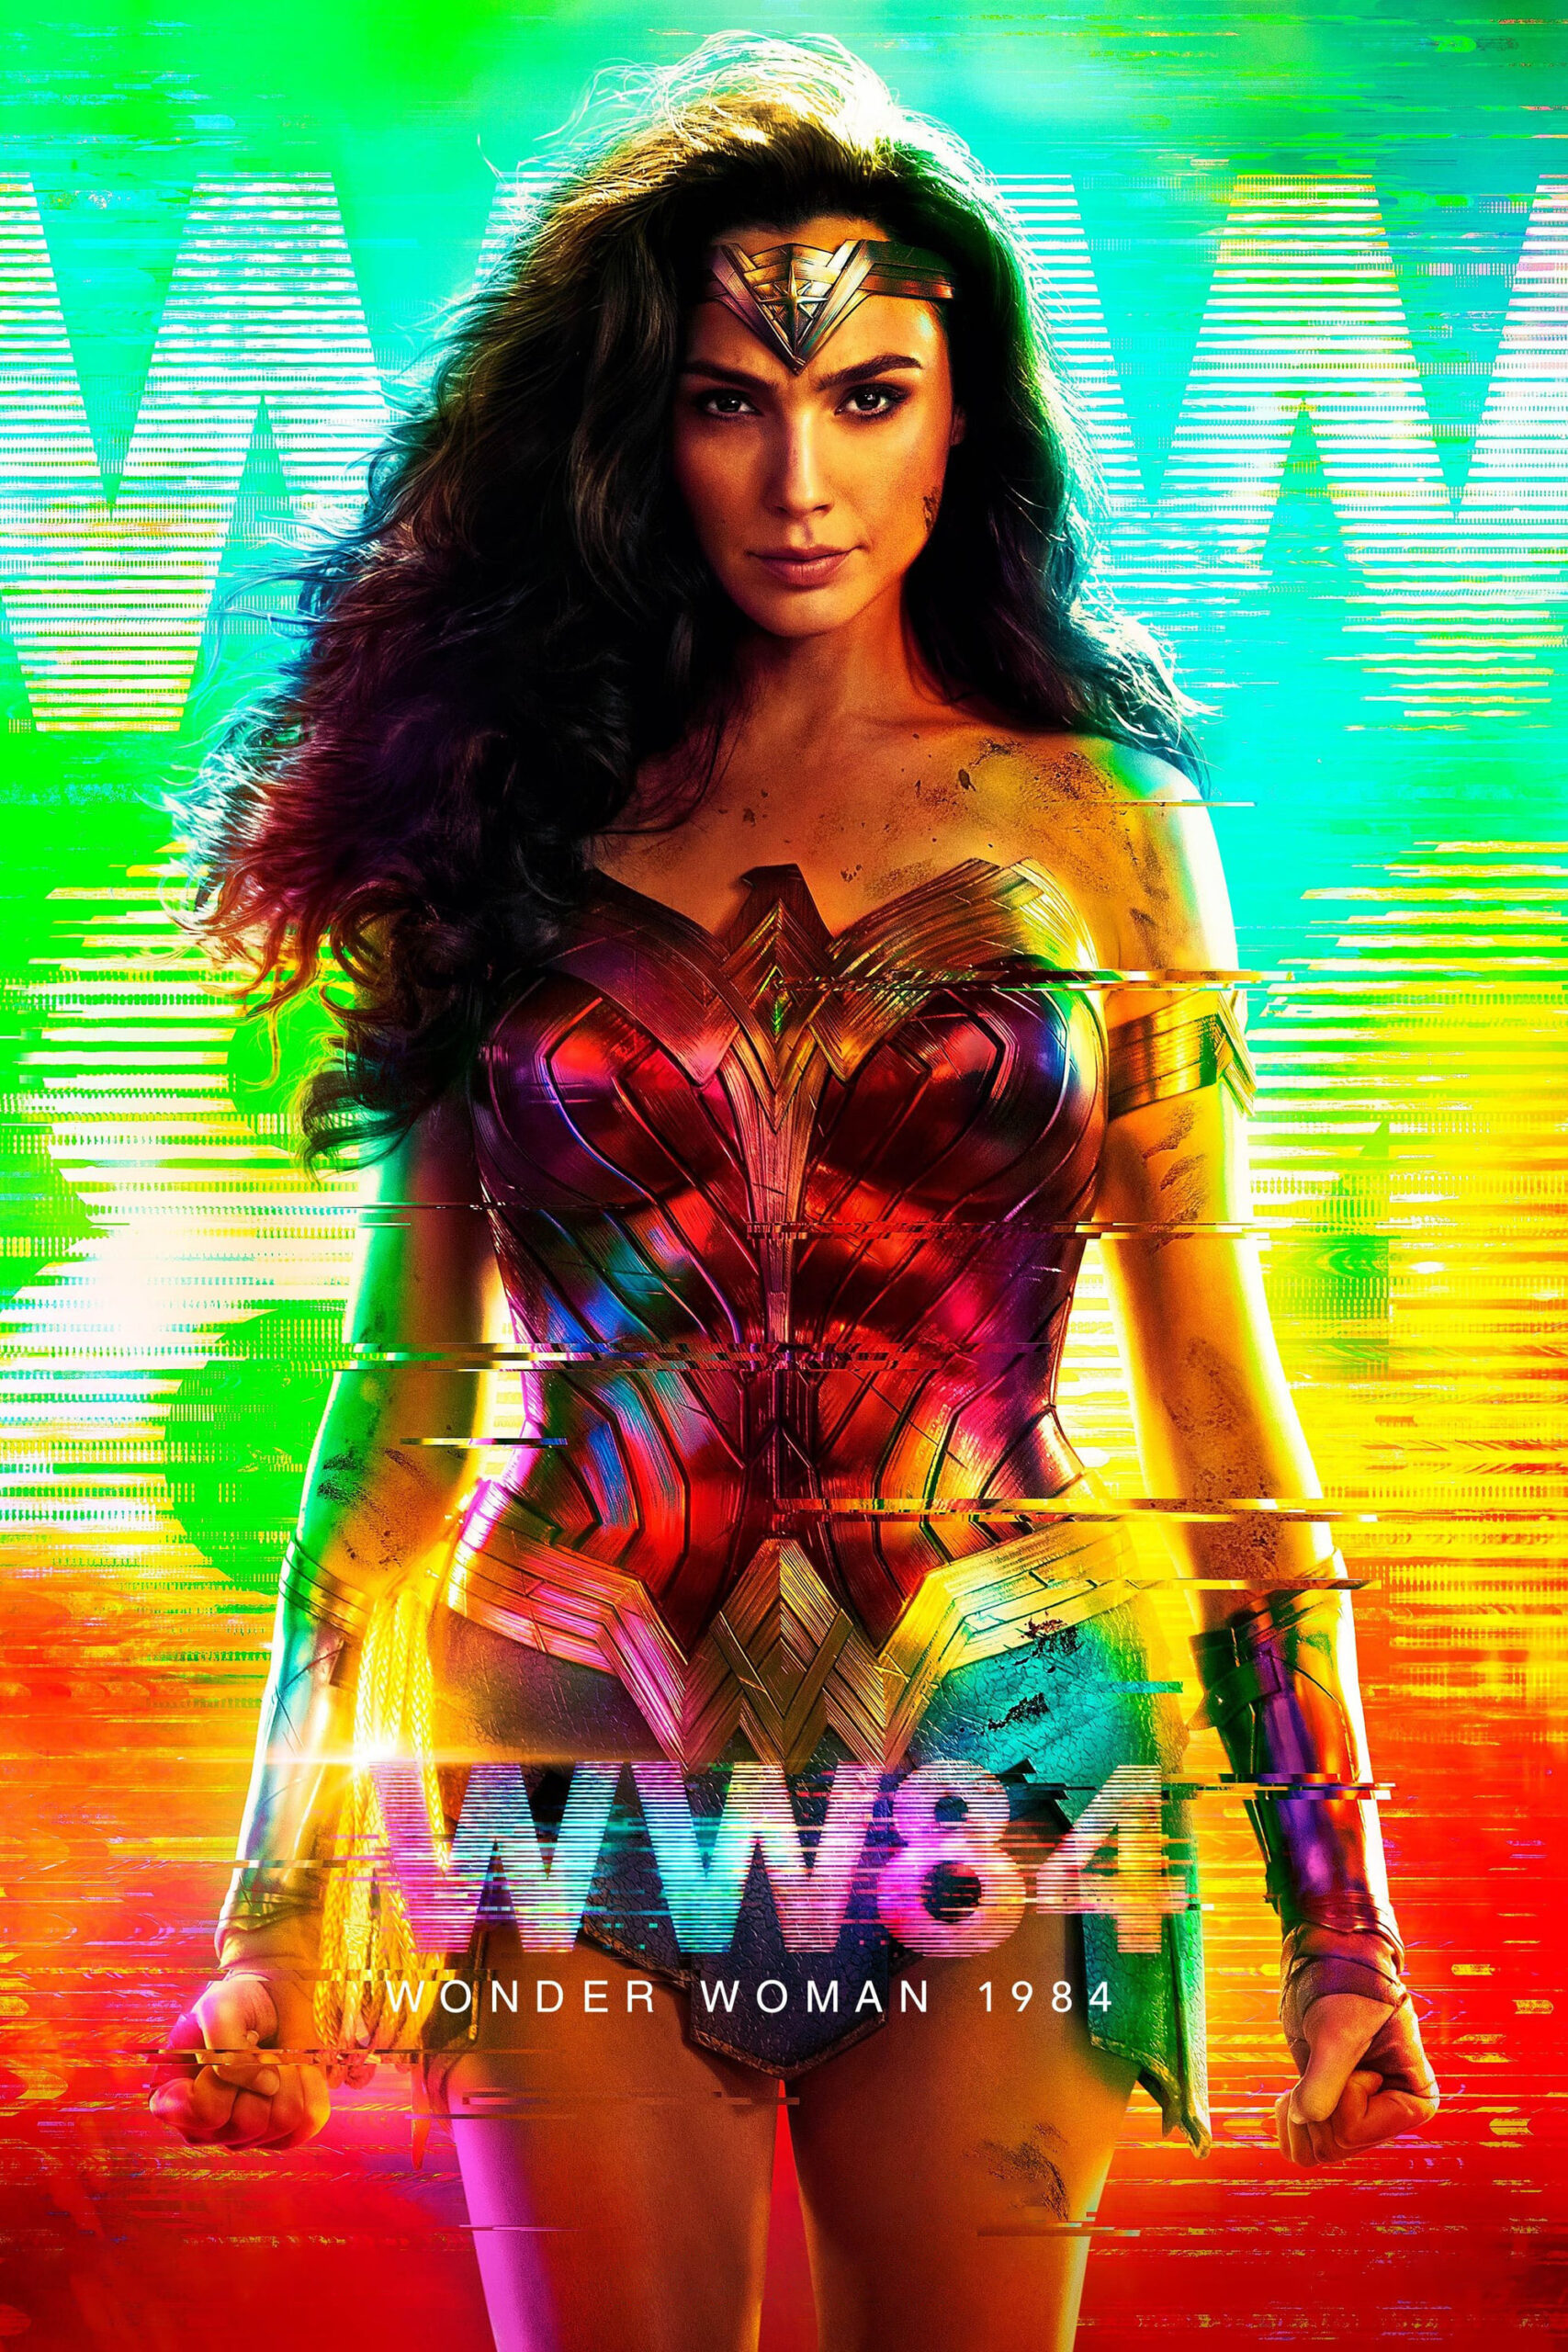 Poster for the movie "Wonder Woman 1984"